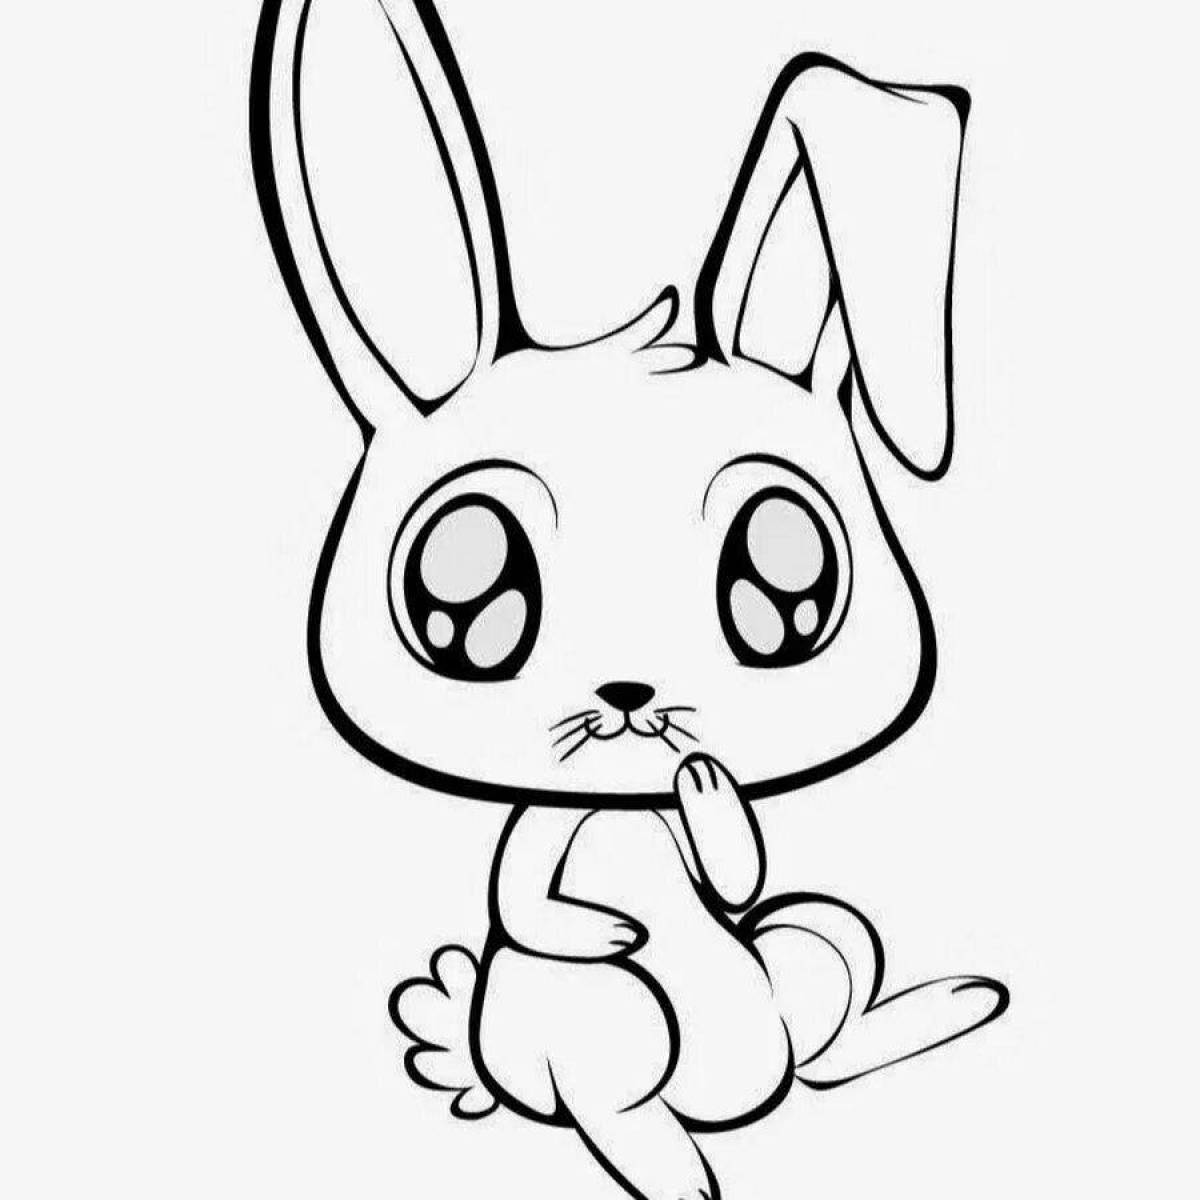 Fluffy-waffy bunny coloring book